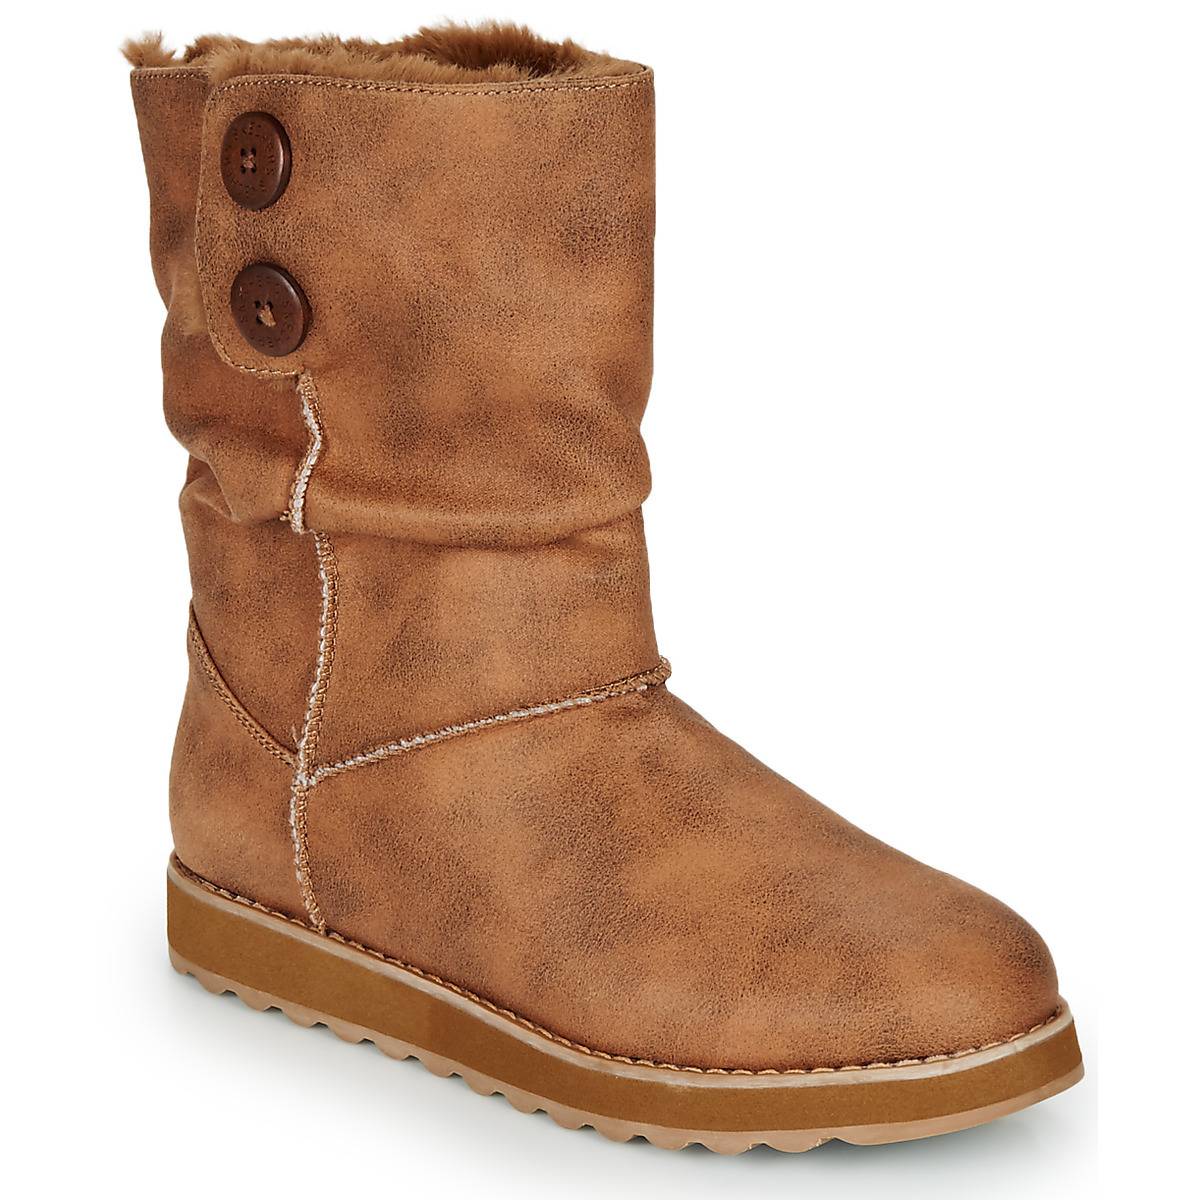 Spartoo - Lady Boots in Brown from Skechers GOOFASH